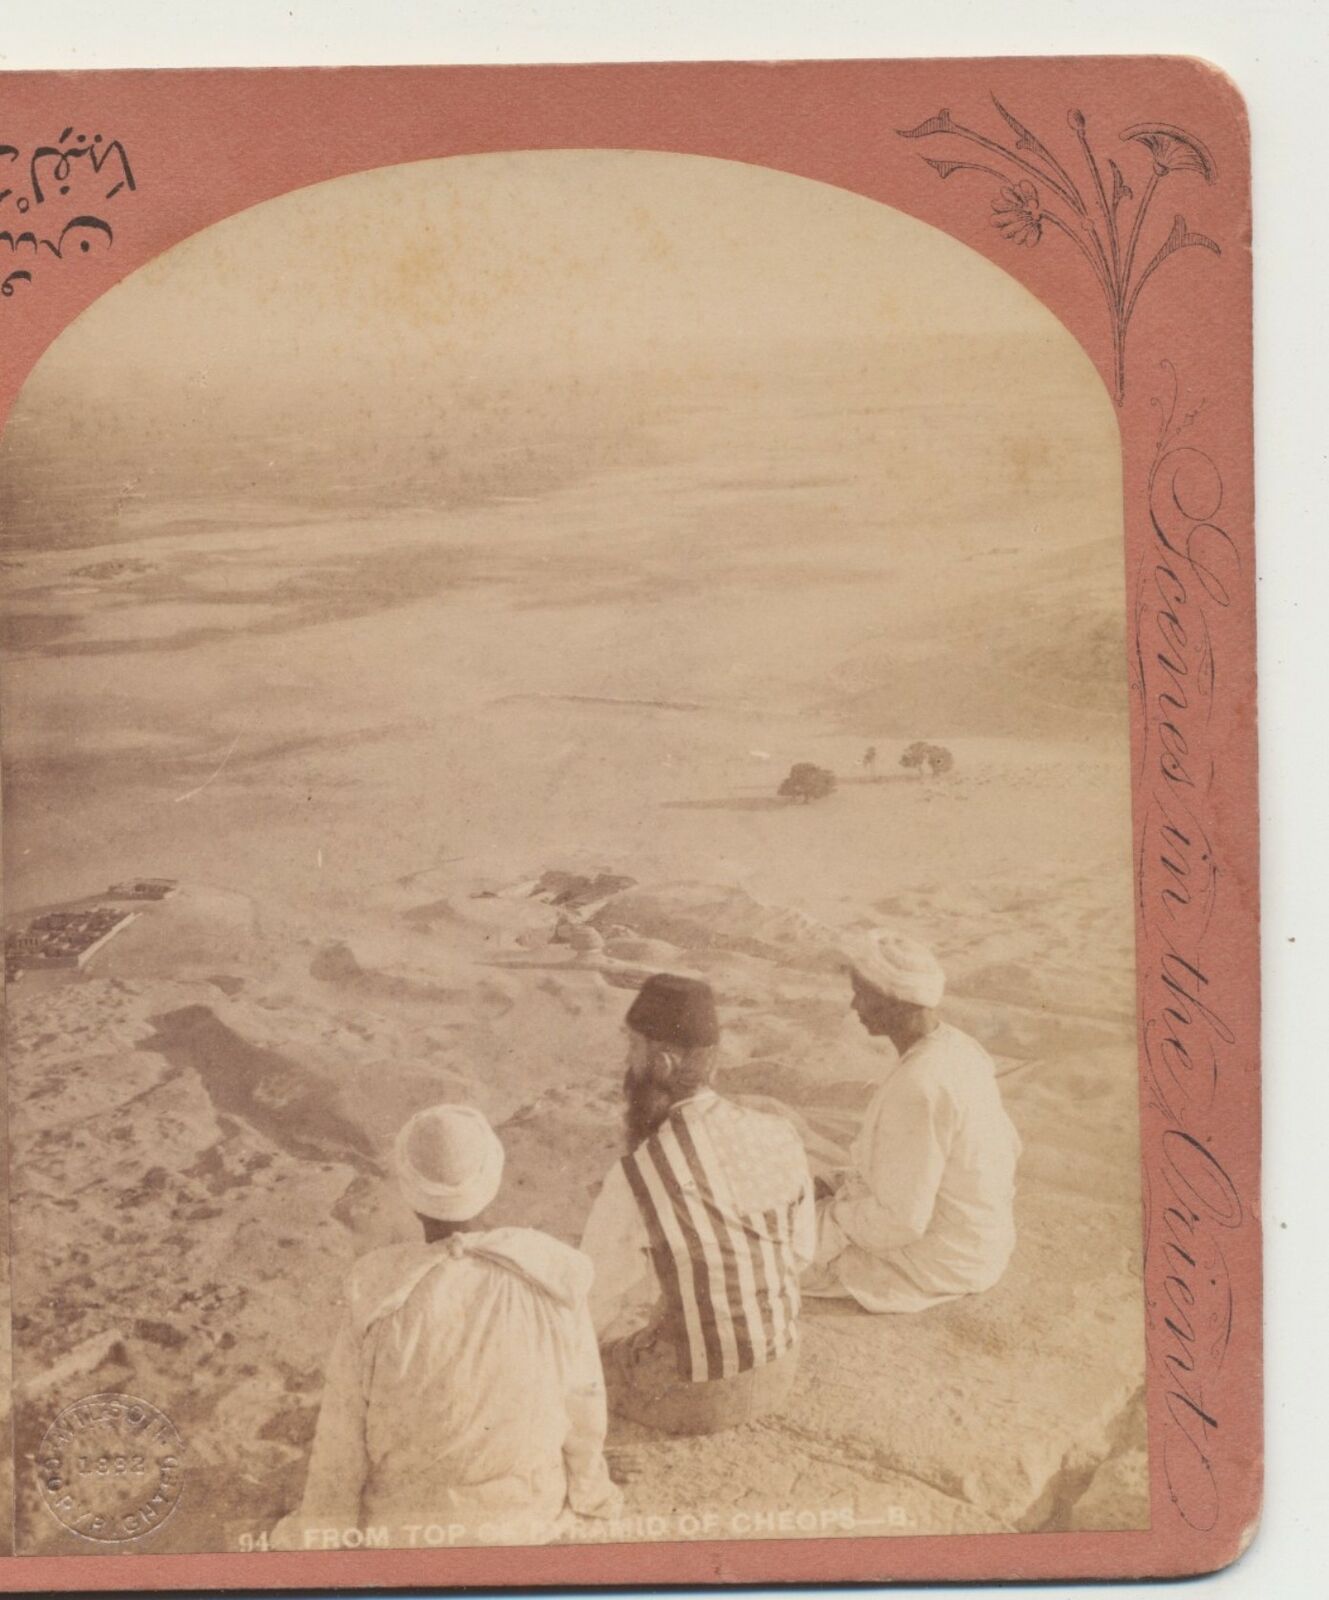 Men top of Pyramid of Cheops Egypt Wilson Scenes in the Orient Stereoview 1882